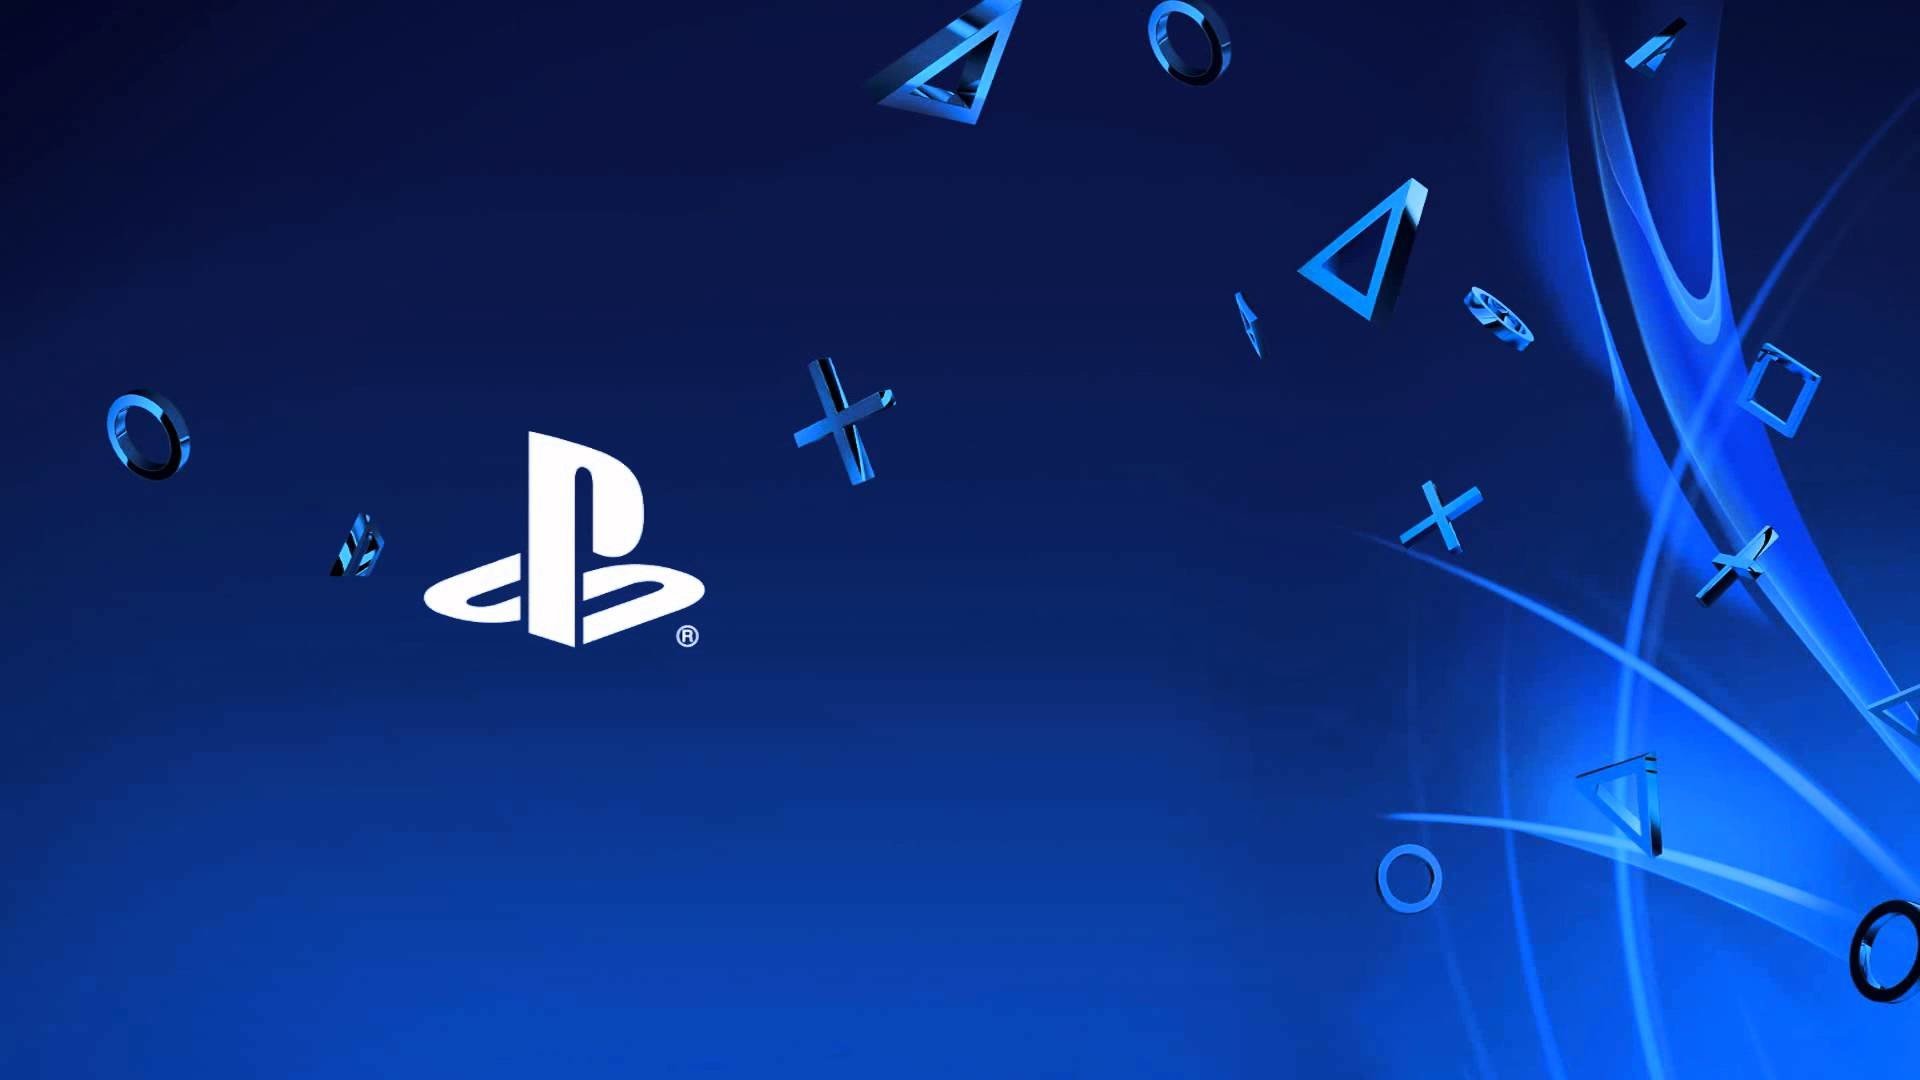 Free download PS4 Wallpaper [1920x1080] for your Desktop, Mobile & Tablet. Explore PS4 Background. PS4 Wallpaper, PS4 Wallpaper, Wallpaper